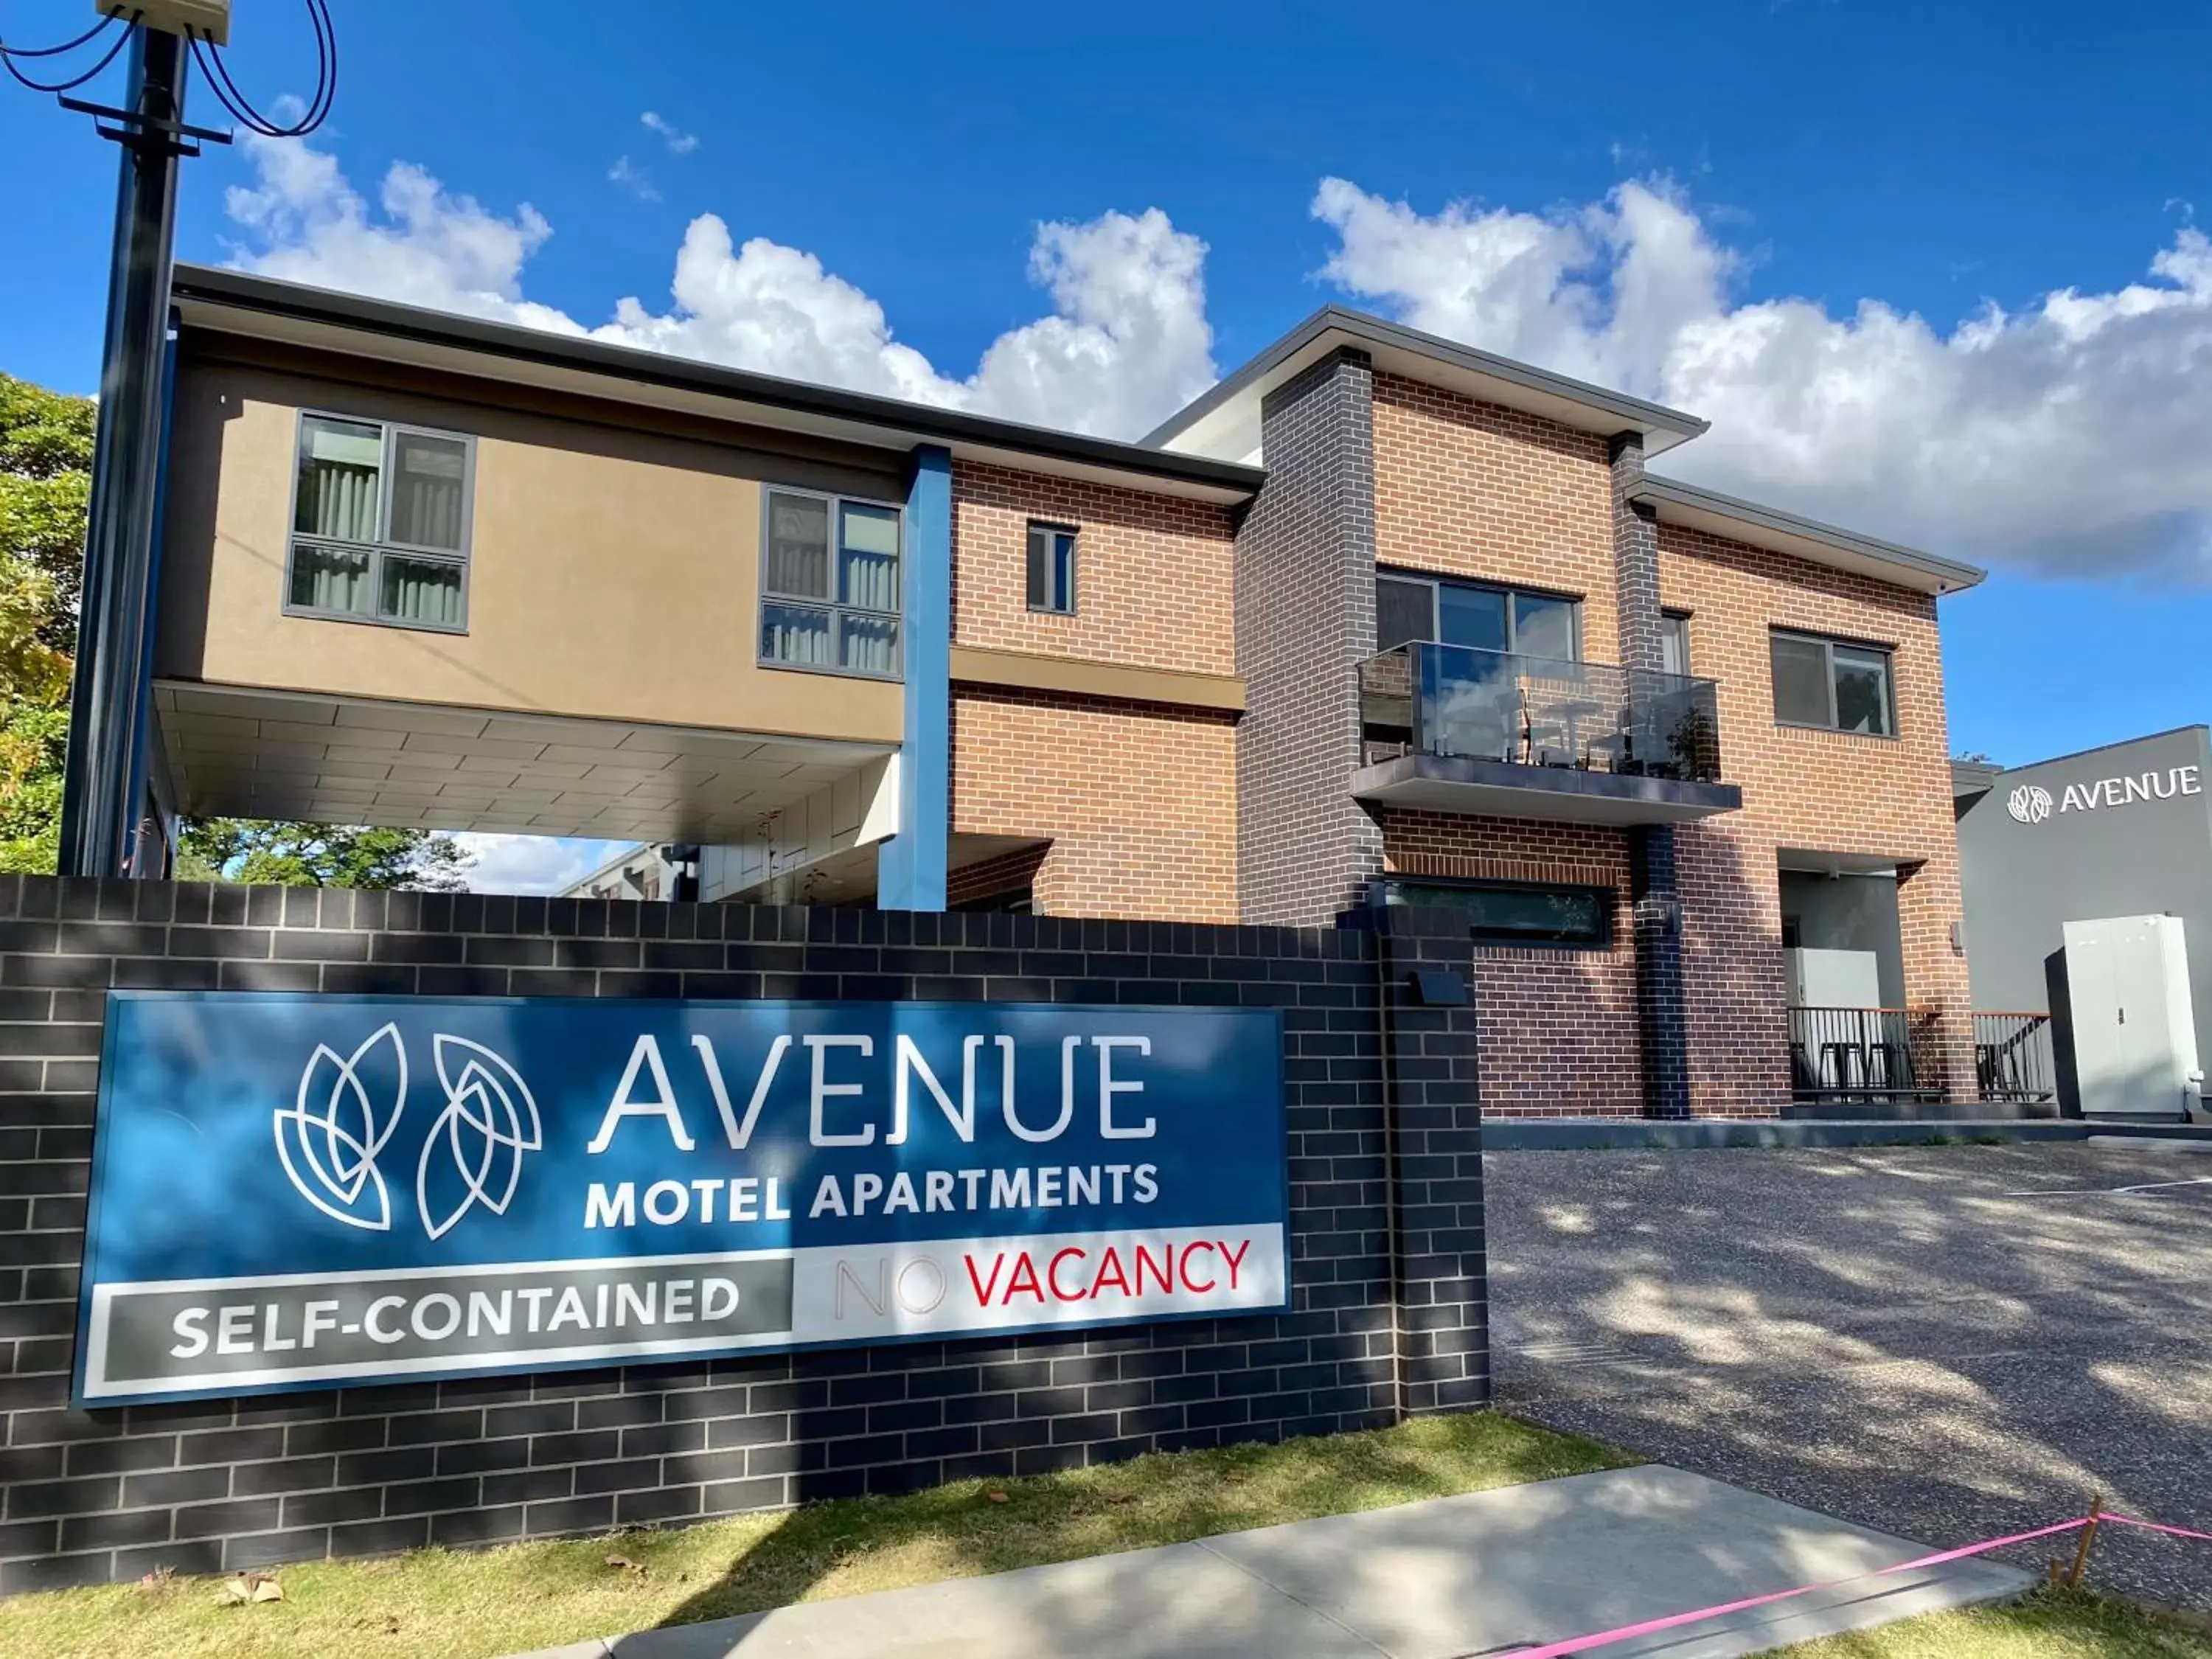 Property Building in AVENUE MOTEL APARTMENTS